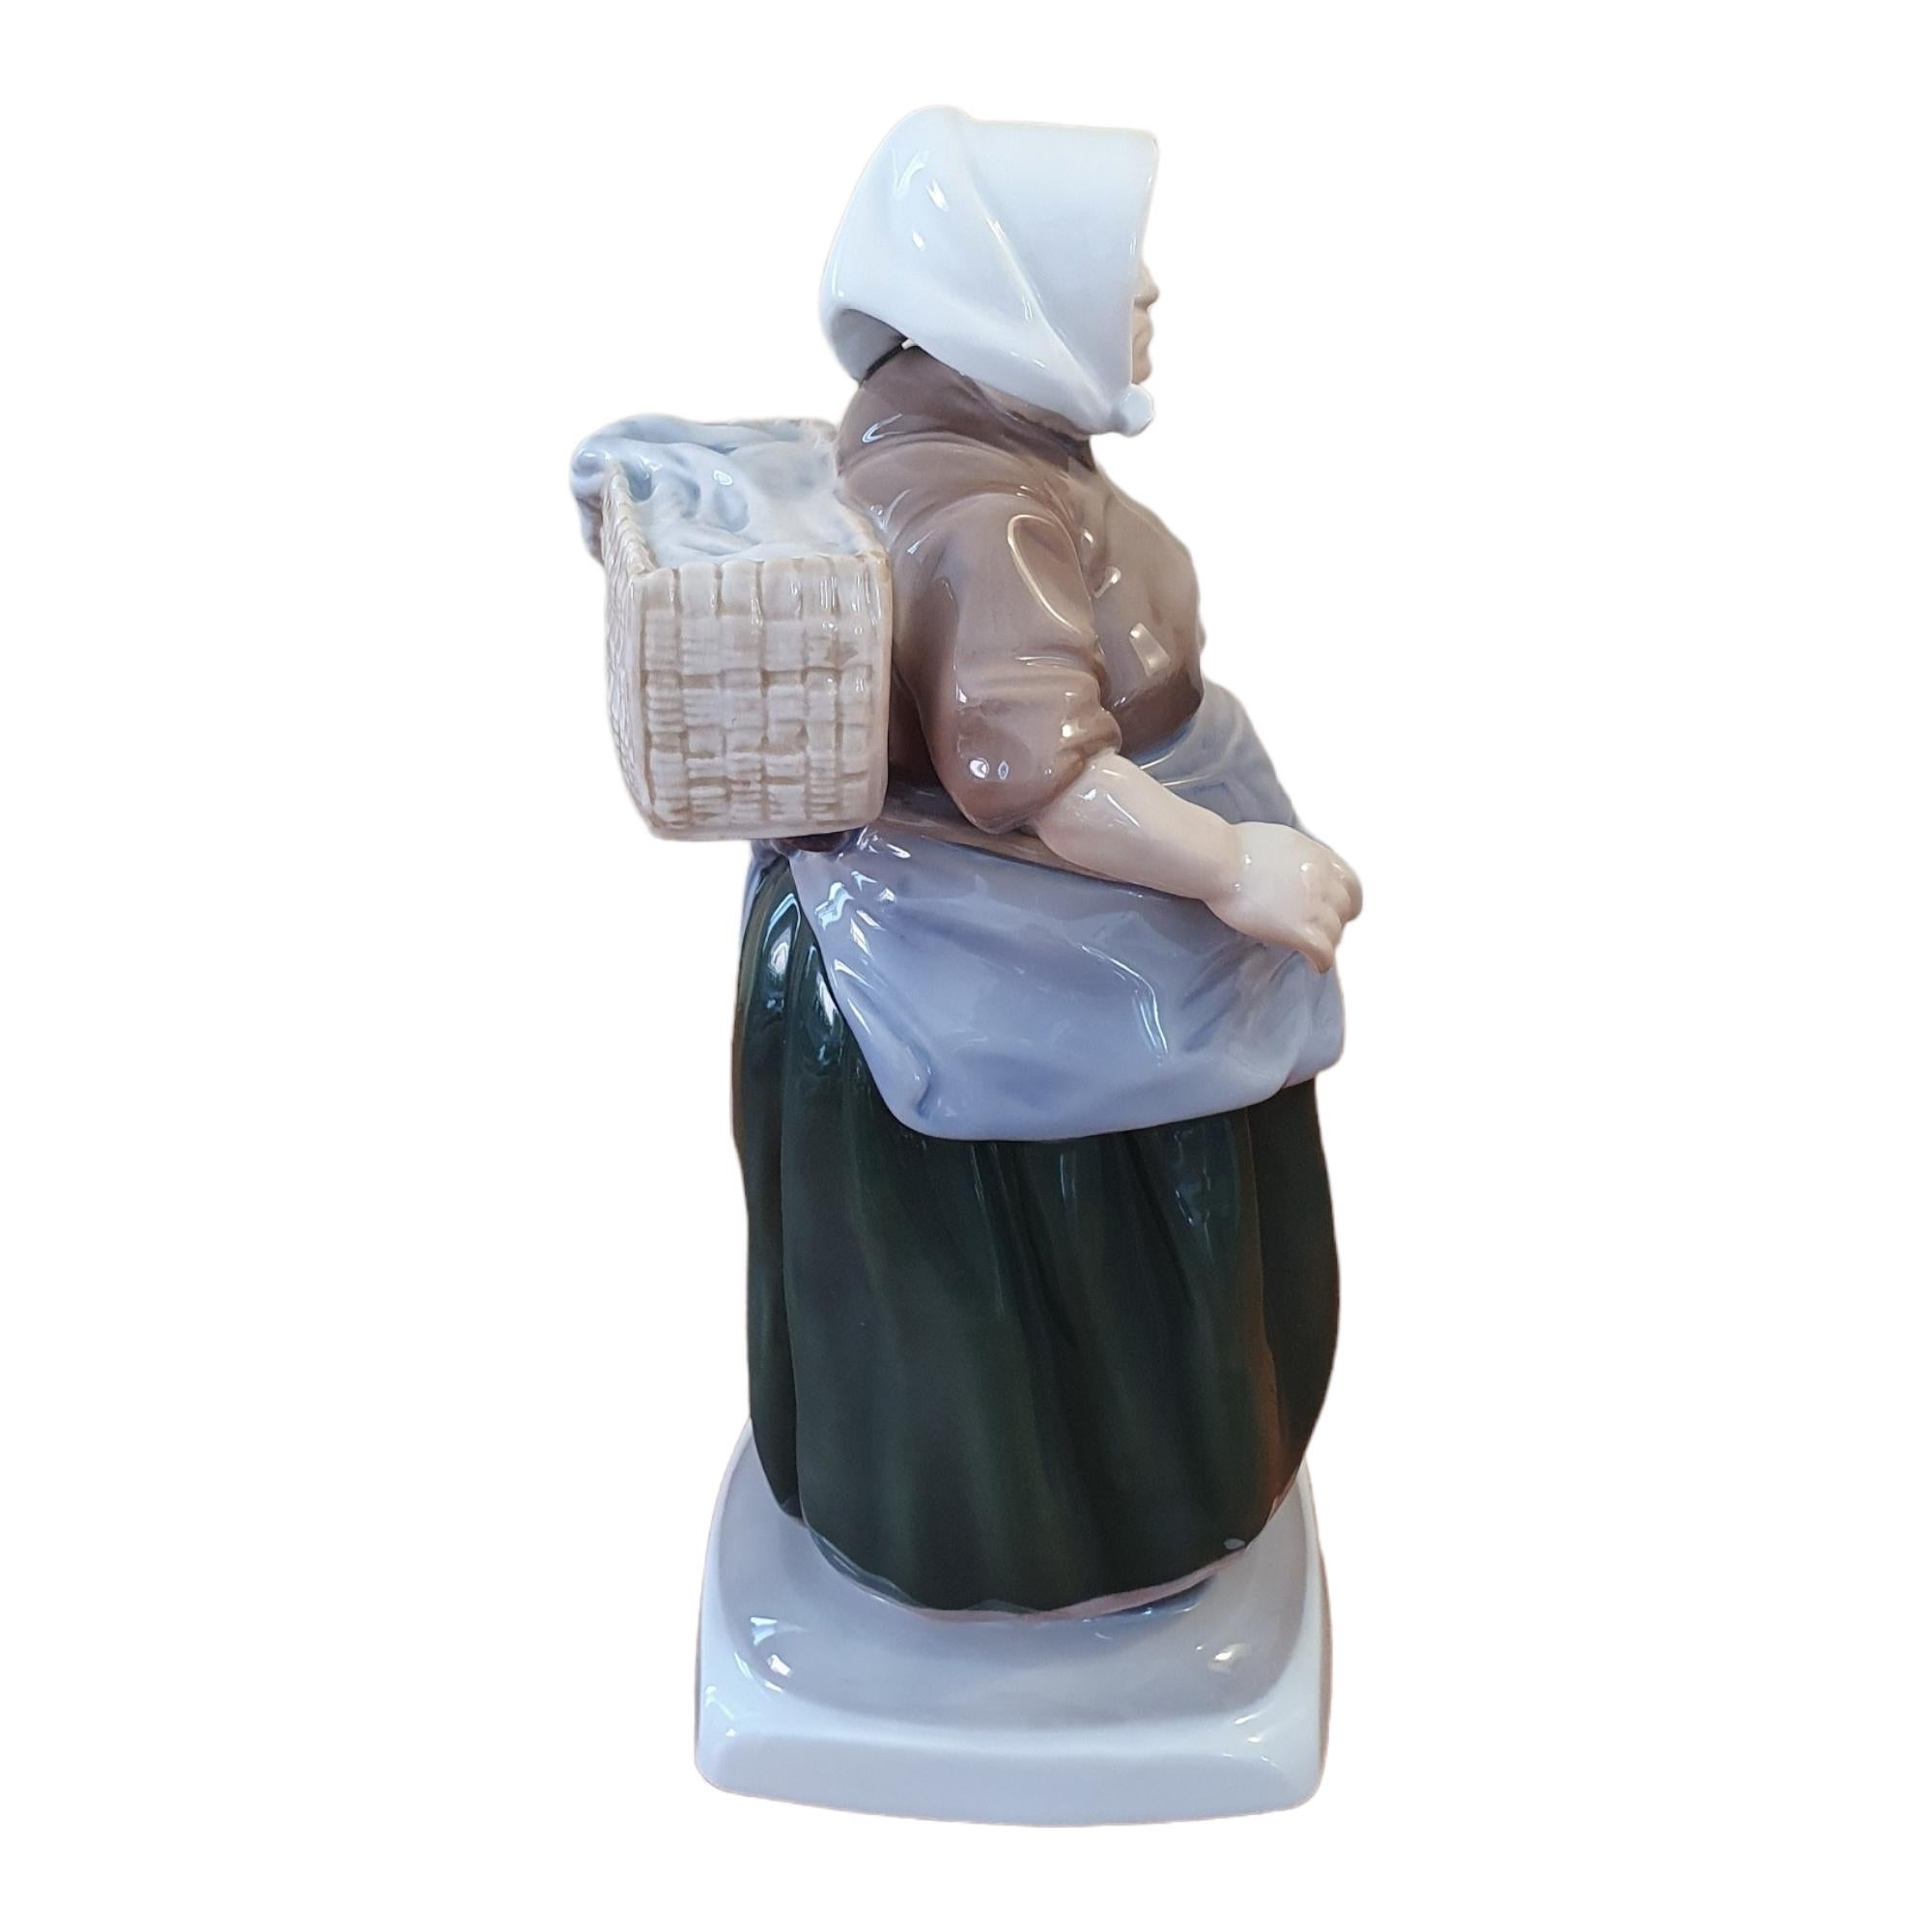 20th Century 20th century glazed Porcelain Fishermans Wife figurine For Sale